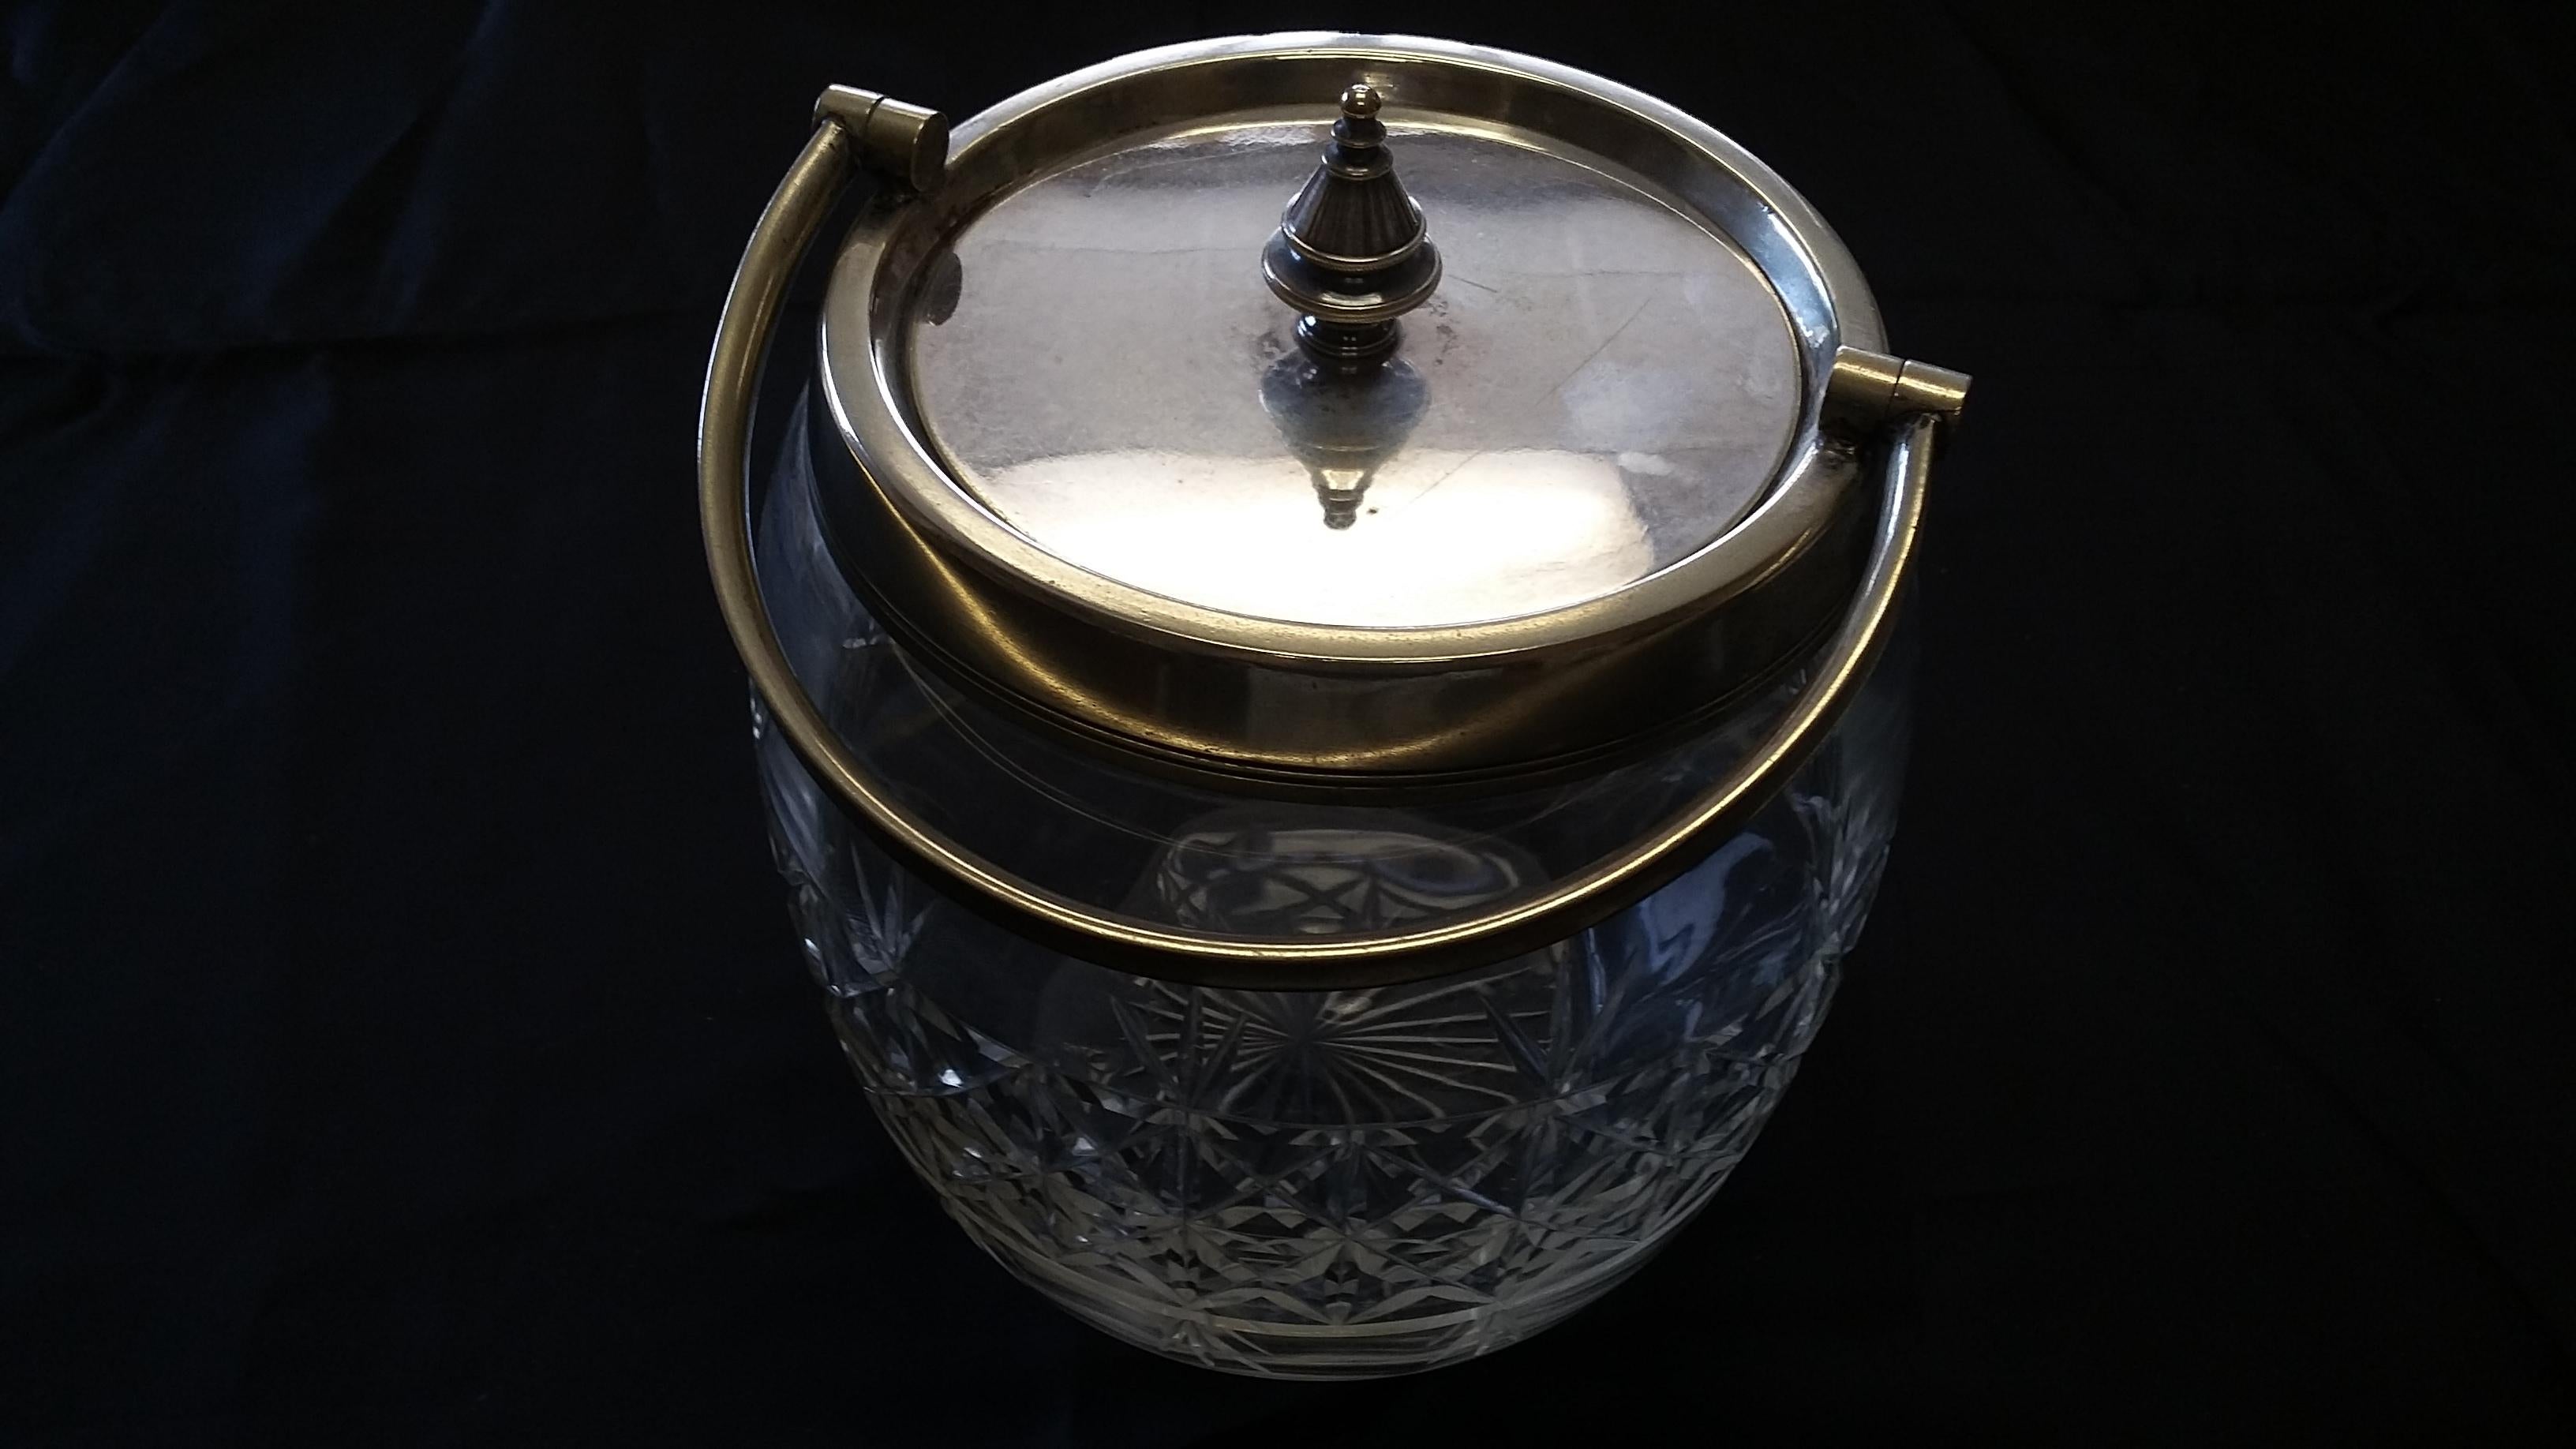 Beautiful cut glass crystal biscuit jar with silver plated rim and handle. Made in England, circa 1870. Square cut pattern on the jar. A very nice antique piece.